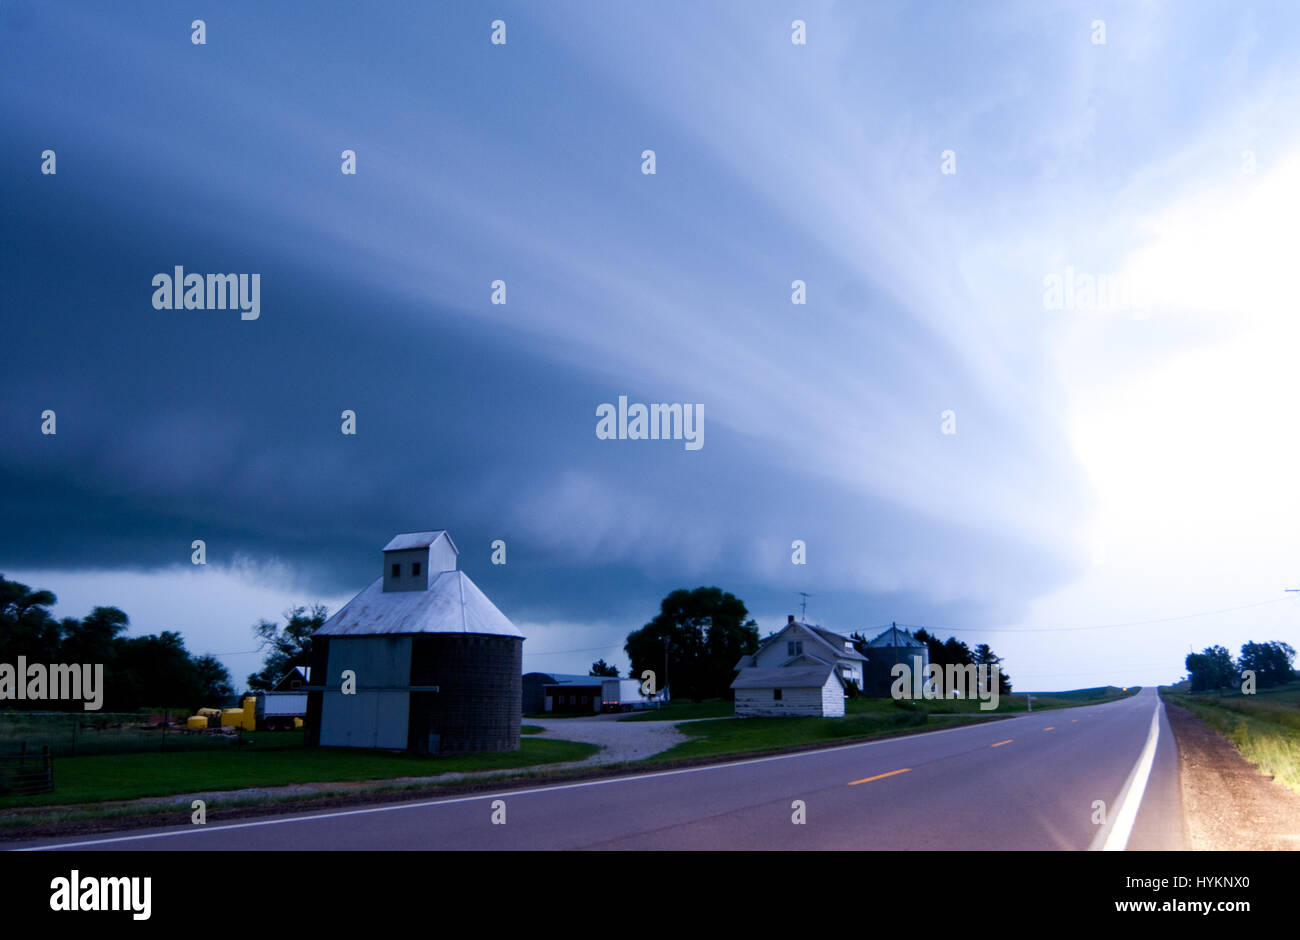 TORNADO ALLEY, USA: Striated supercell. THE DEADLIEST weather events have been captured on camera by one lightning quick photographer. Incredible photographs show extreme weather from America’s Tornado Alley, renowned for the frequency of its storms. From terrifying lightning bolts to all-encompassing tornados, these pictures manage to capture to ferocity and atmosphere of these natural phenomena. Stock Photo